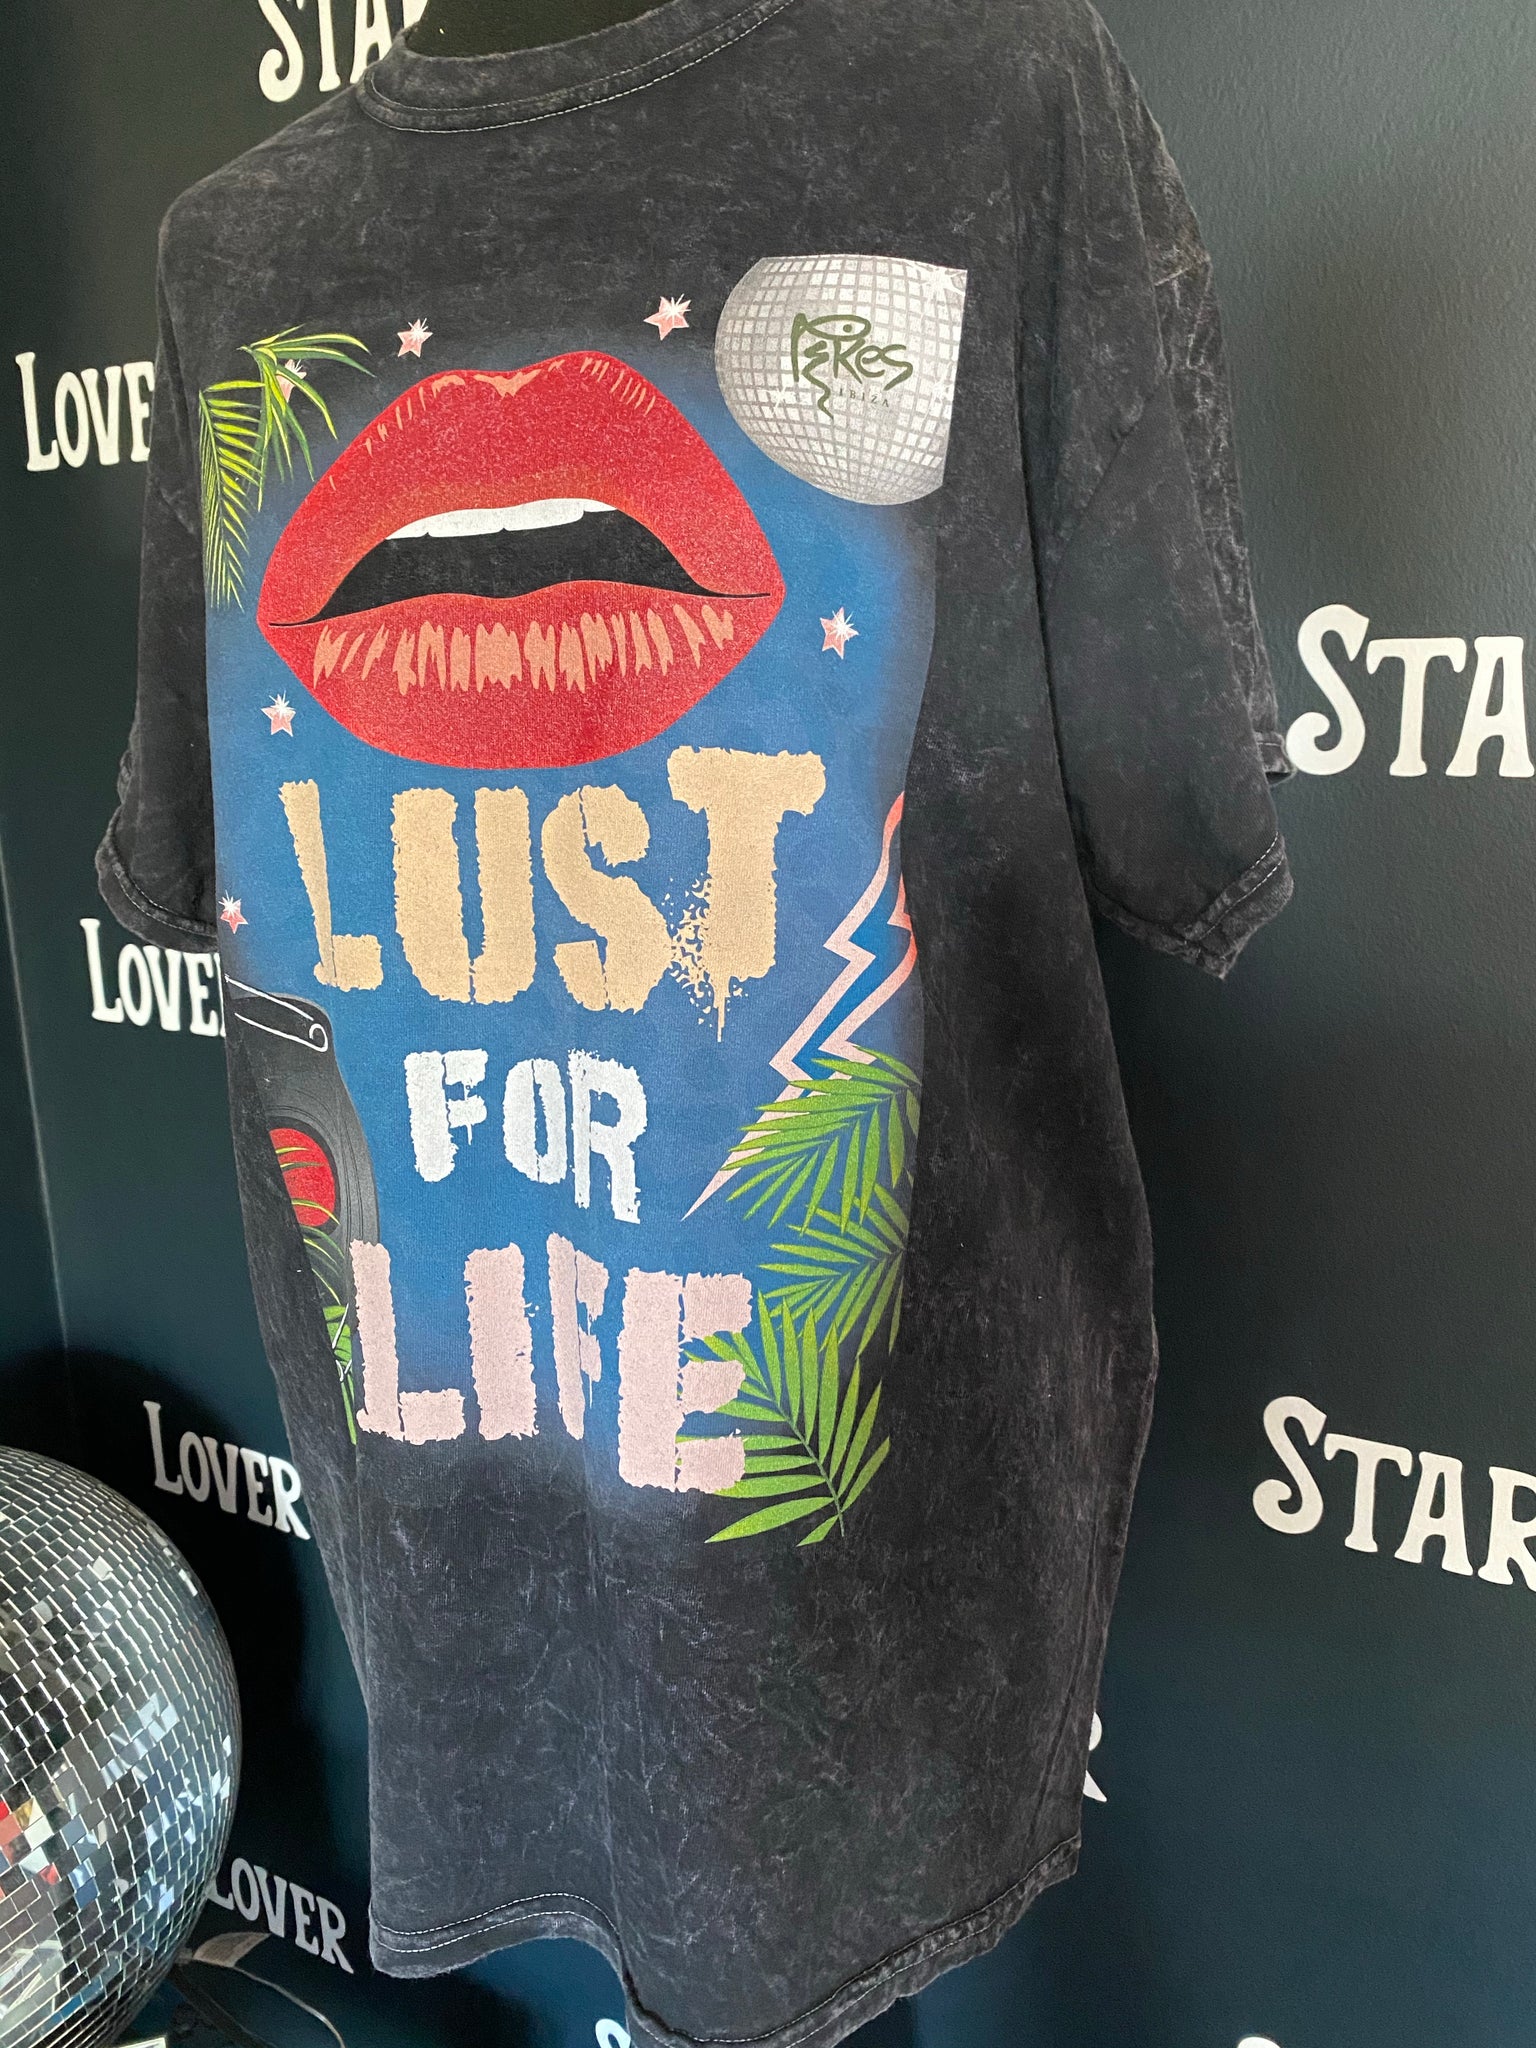 ‘Lust For Life’ - Starlover x Pikes Ibiza T-Shirt